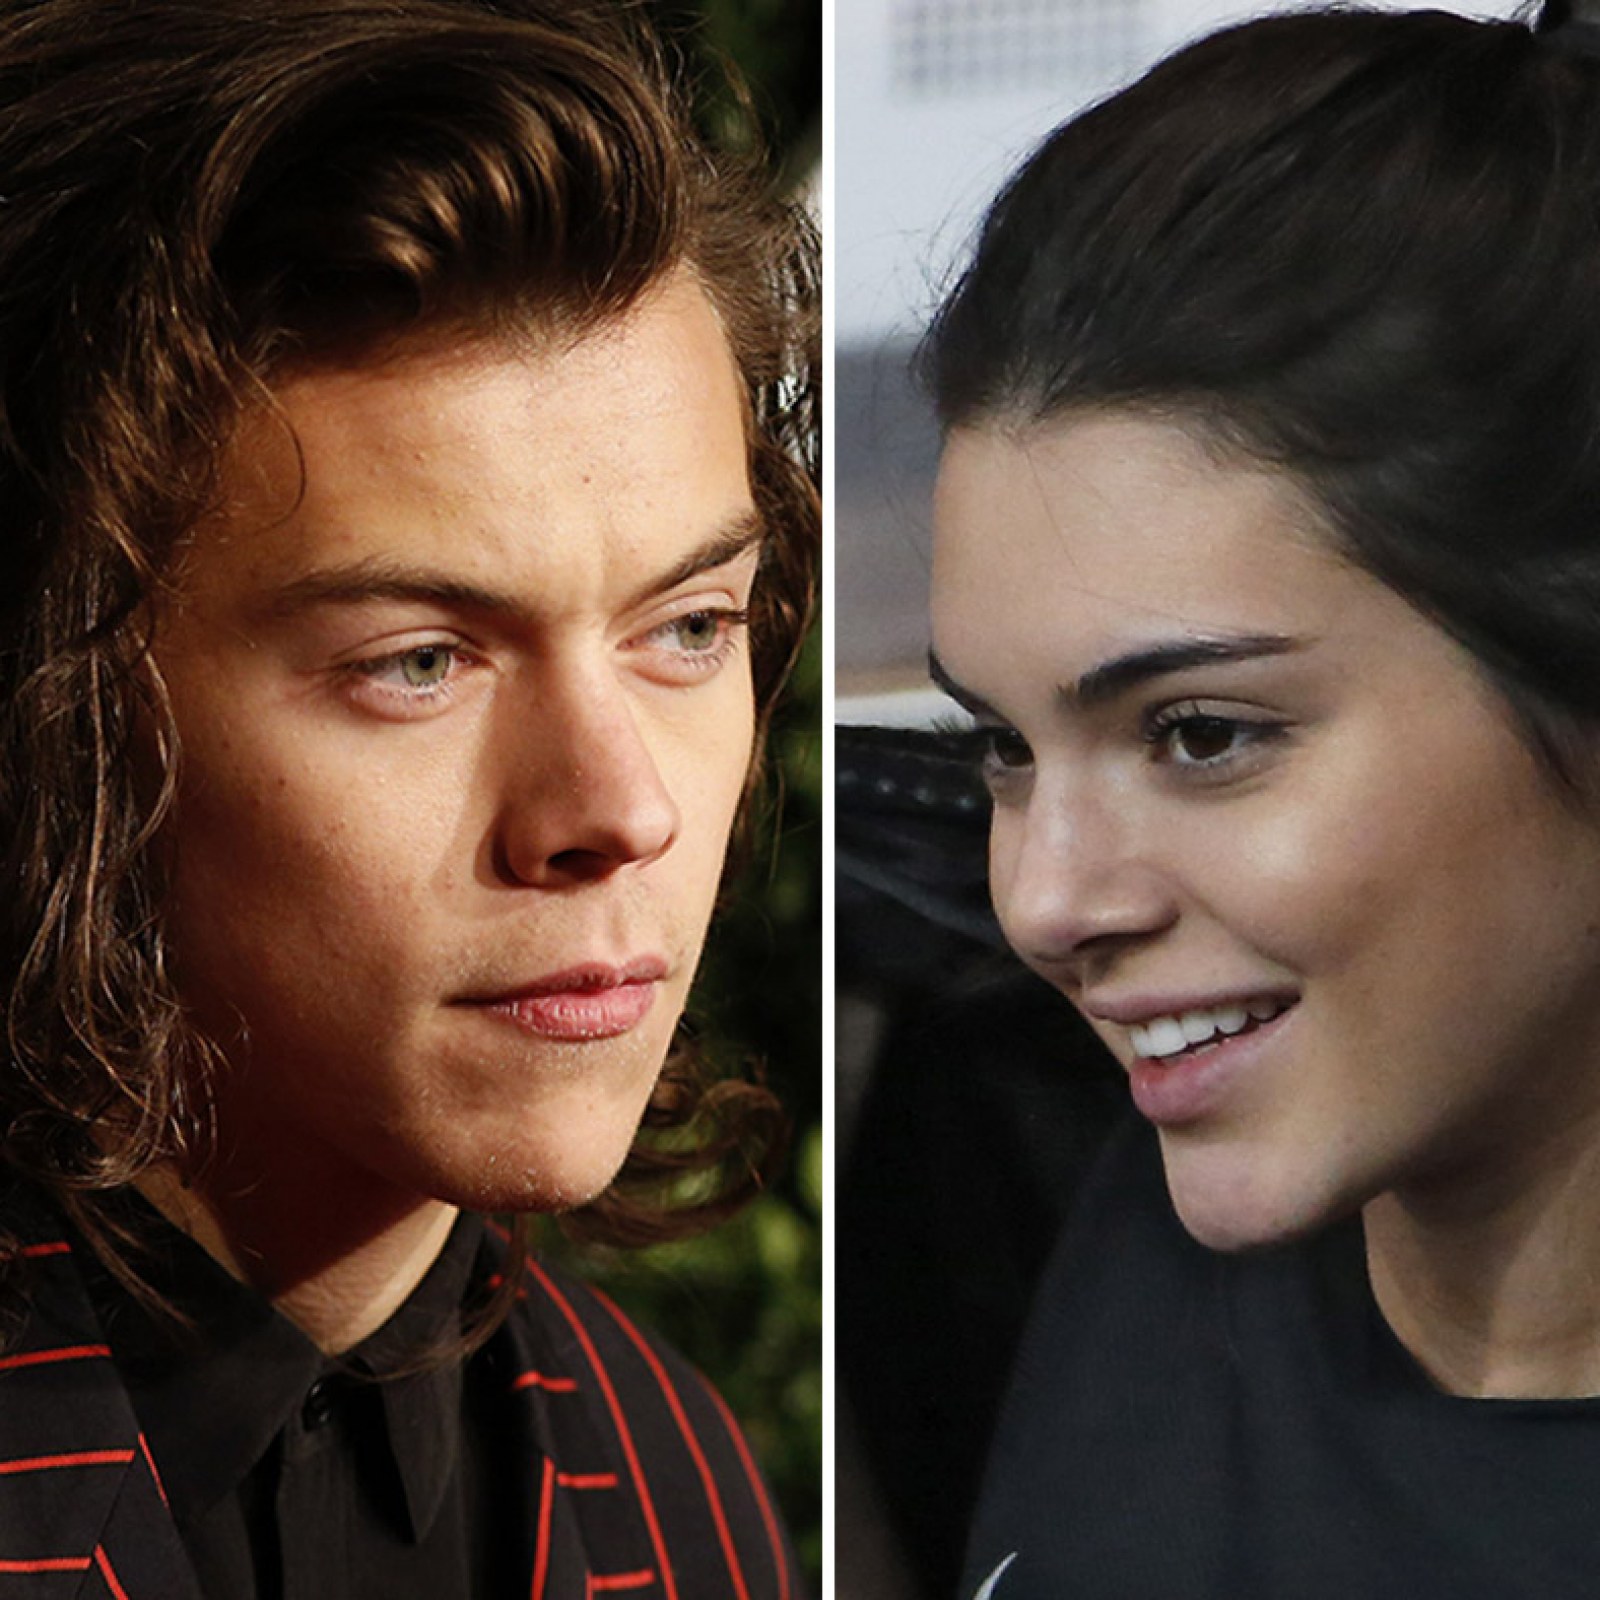 Kendall Jenner and Harry Styles not dating but just 'hanging out'